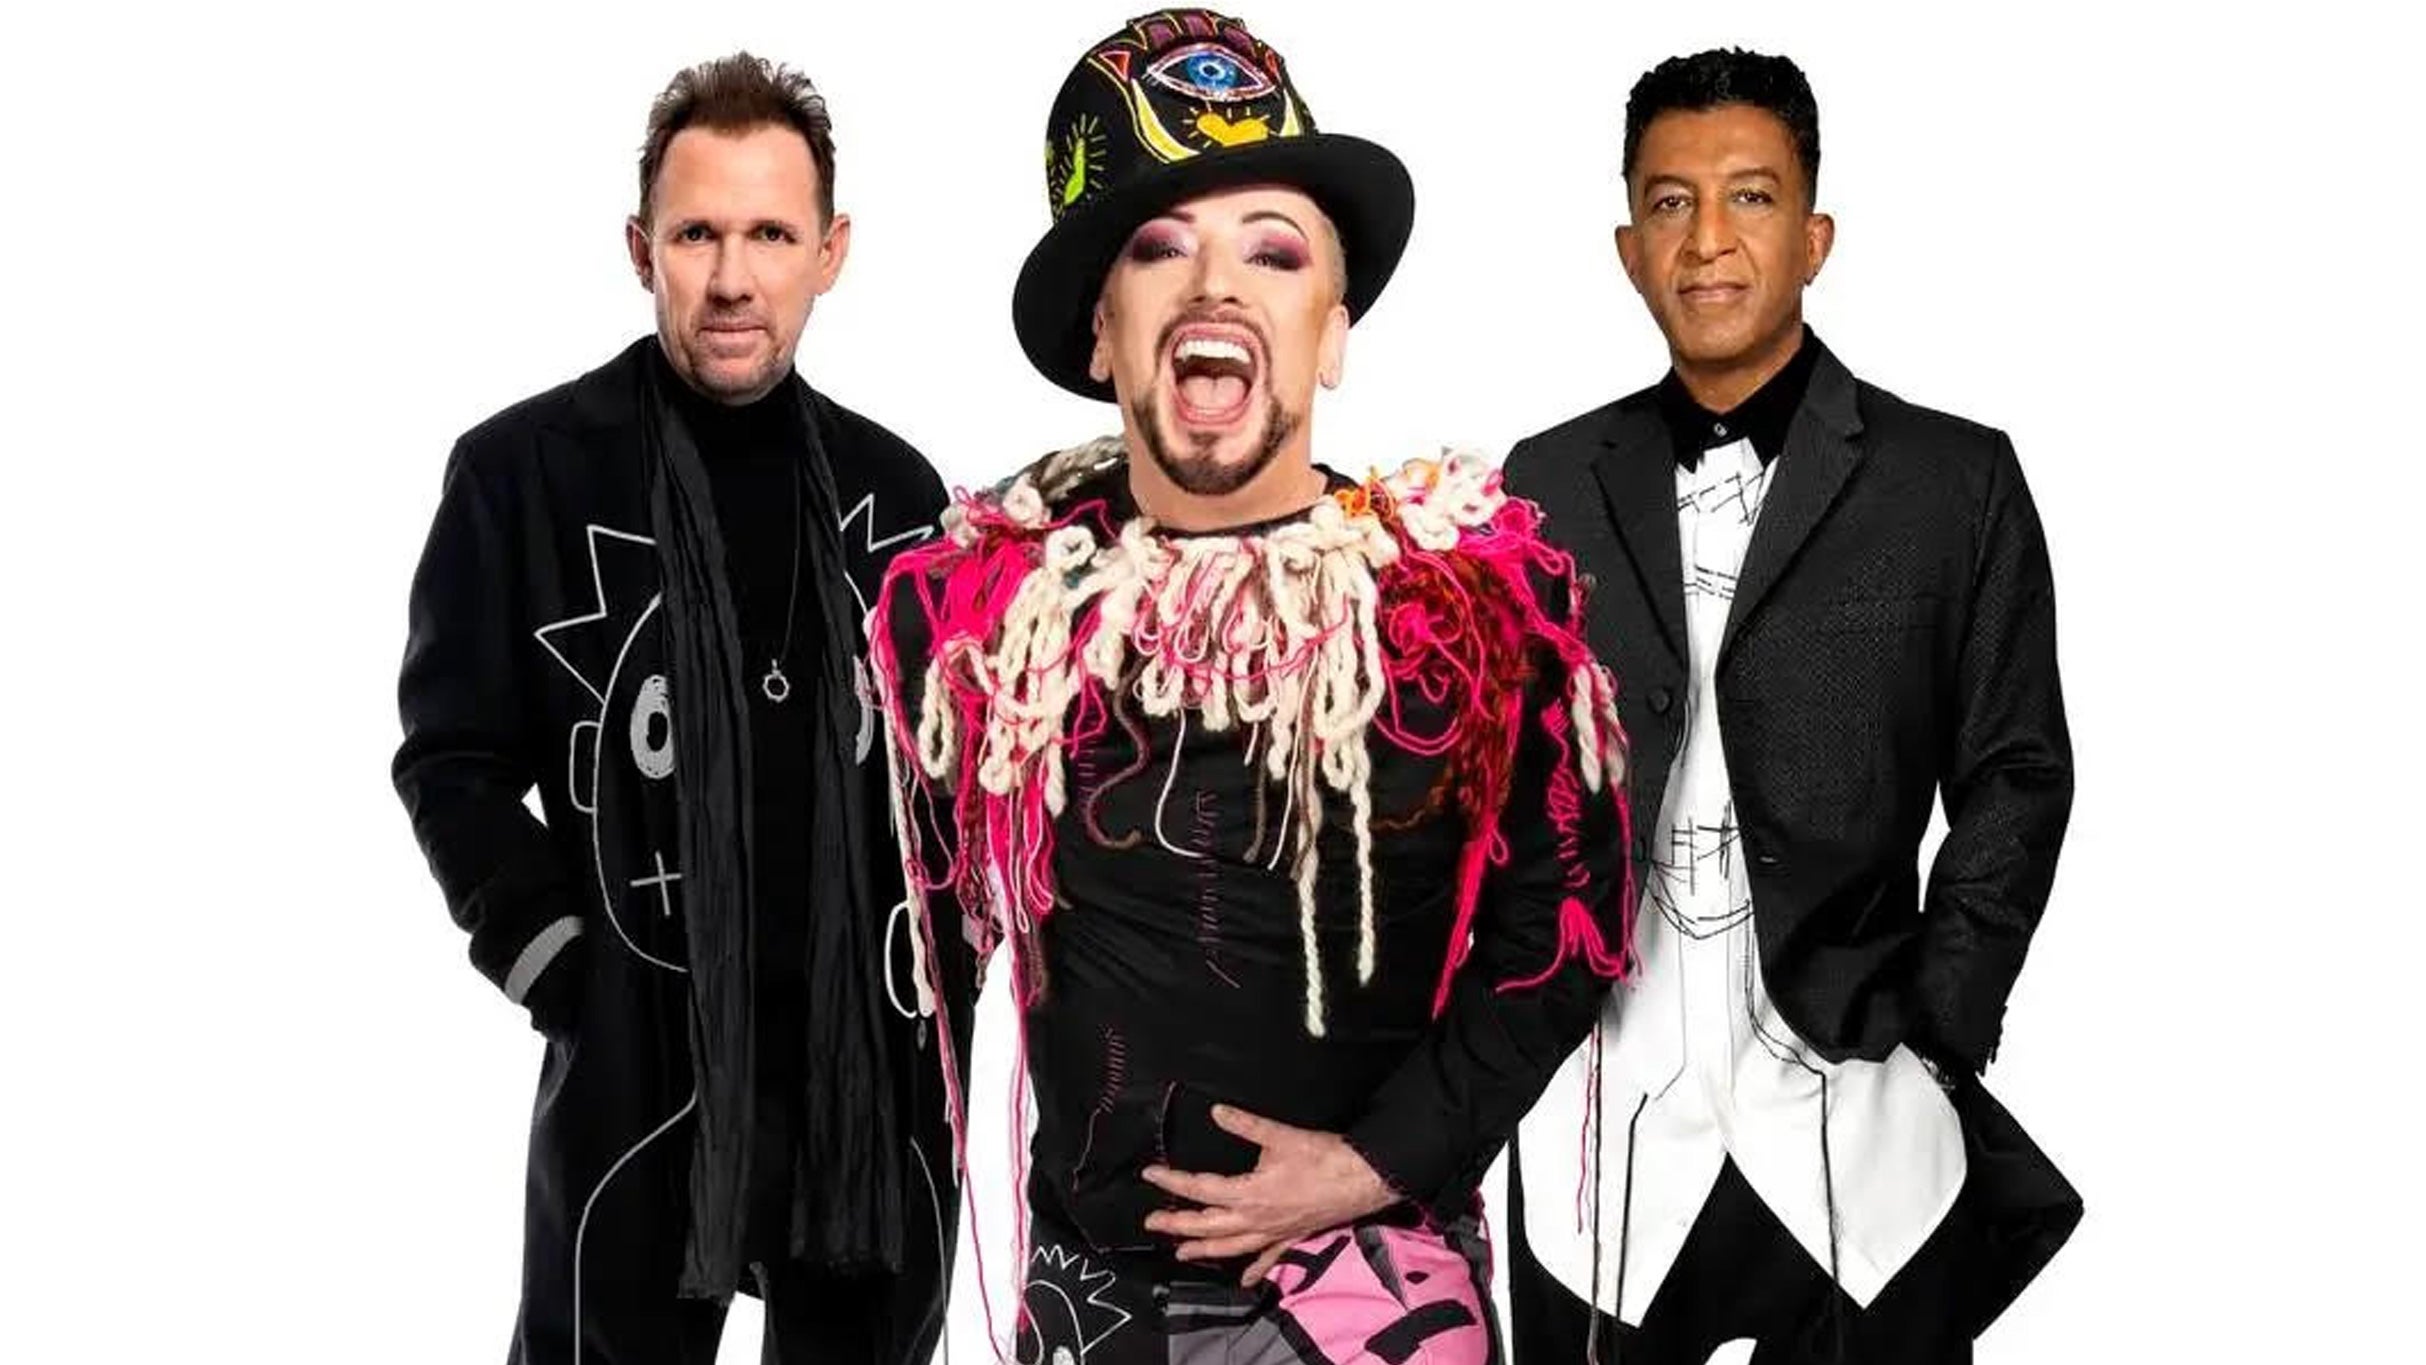 Boy George & Culture Club: The Letting It Go Show in Woodlands promo photo for Woodforest presale offer code